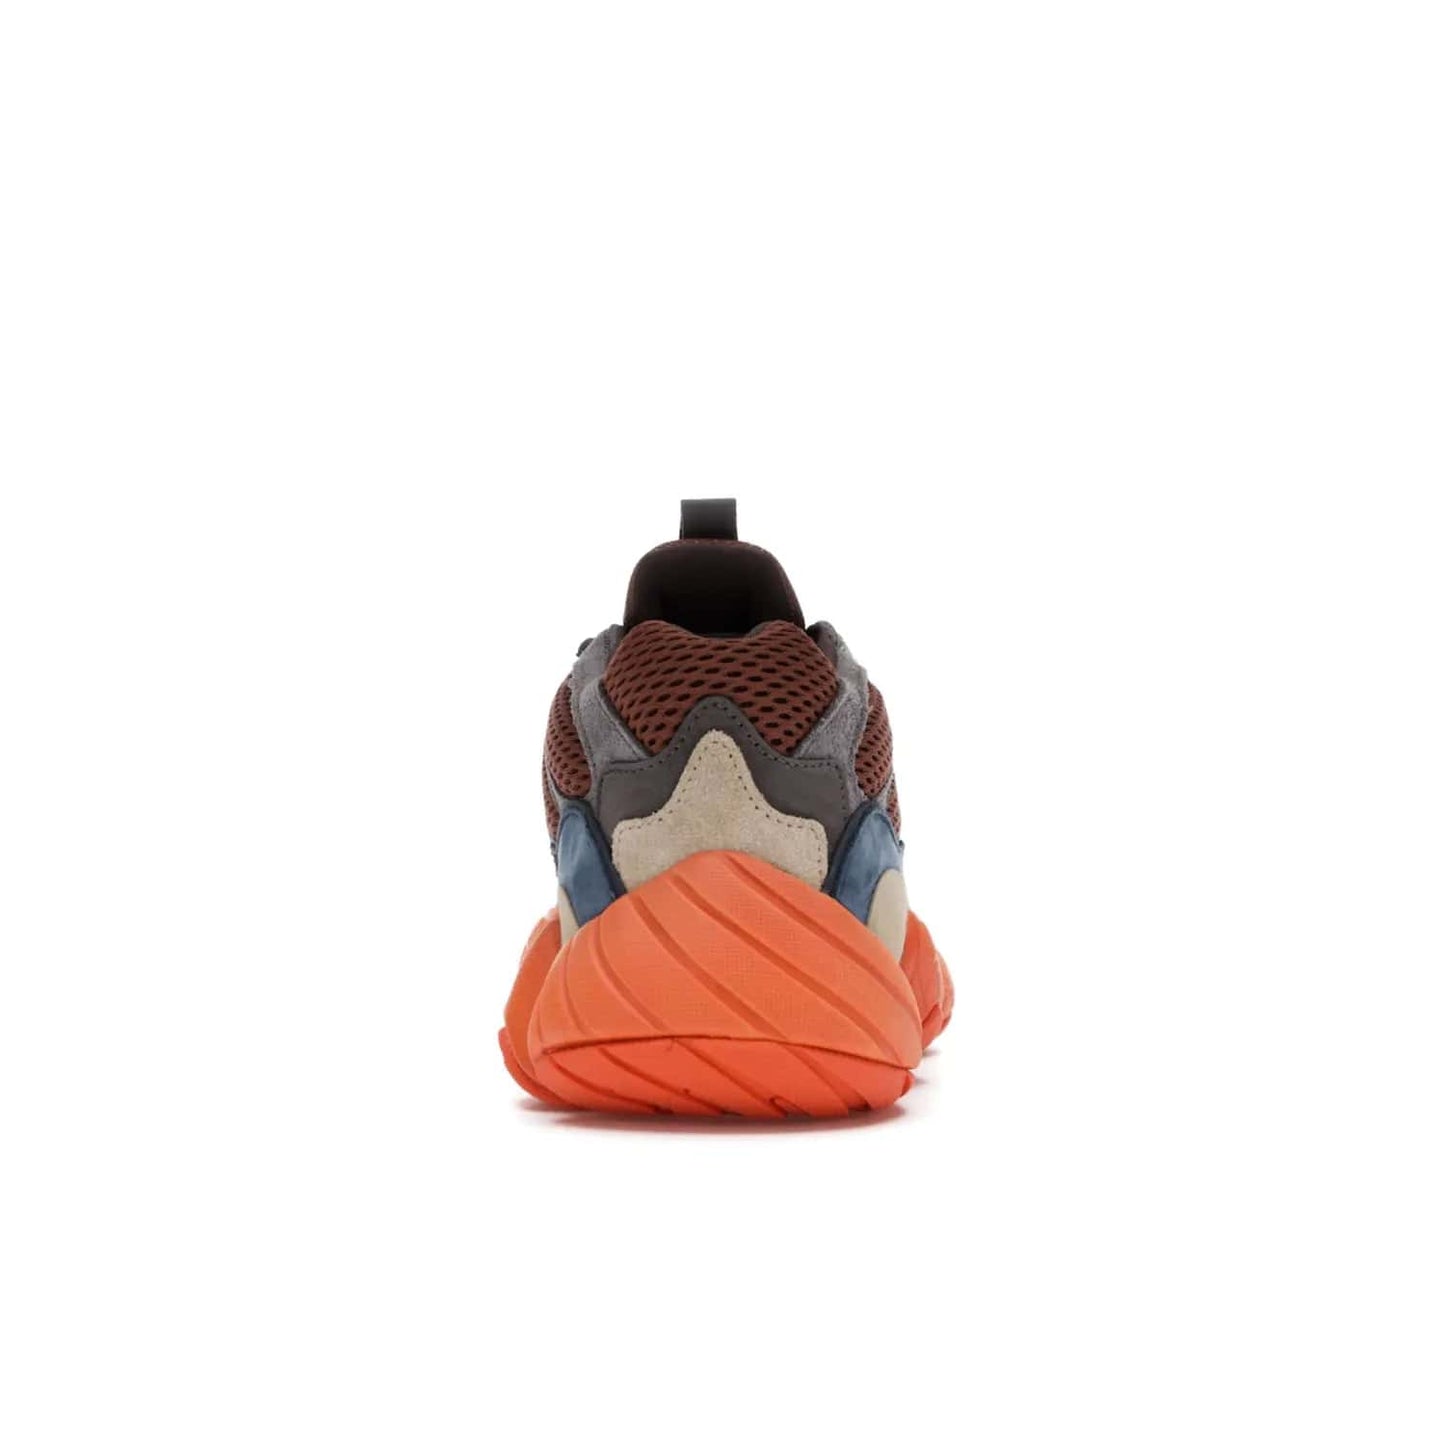 adidas Yeezy 500 Enflame - Image 28 - Only at www.BallersClubKickz.com - Step into style with the adidas Yeezy 500 Enflame. Mix of mesh, leather, and suede layered together to create tonal-brown, dark blue, & orange. Orange AdiPRENE sole provides superior cushioning & comfort. Get yours and experience maximum style.